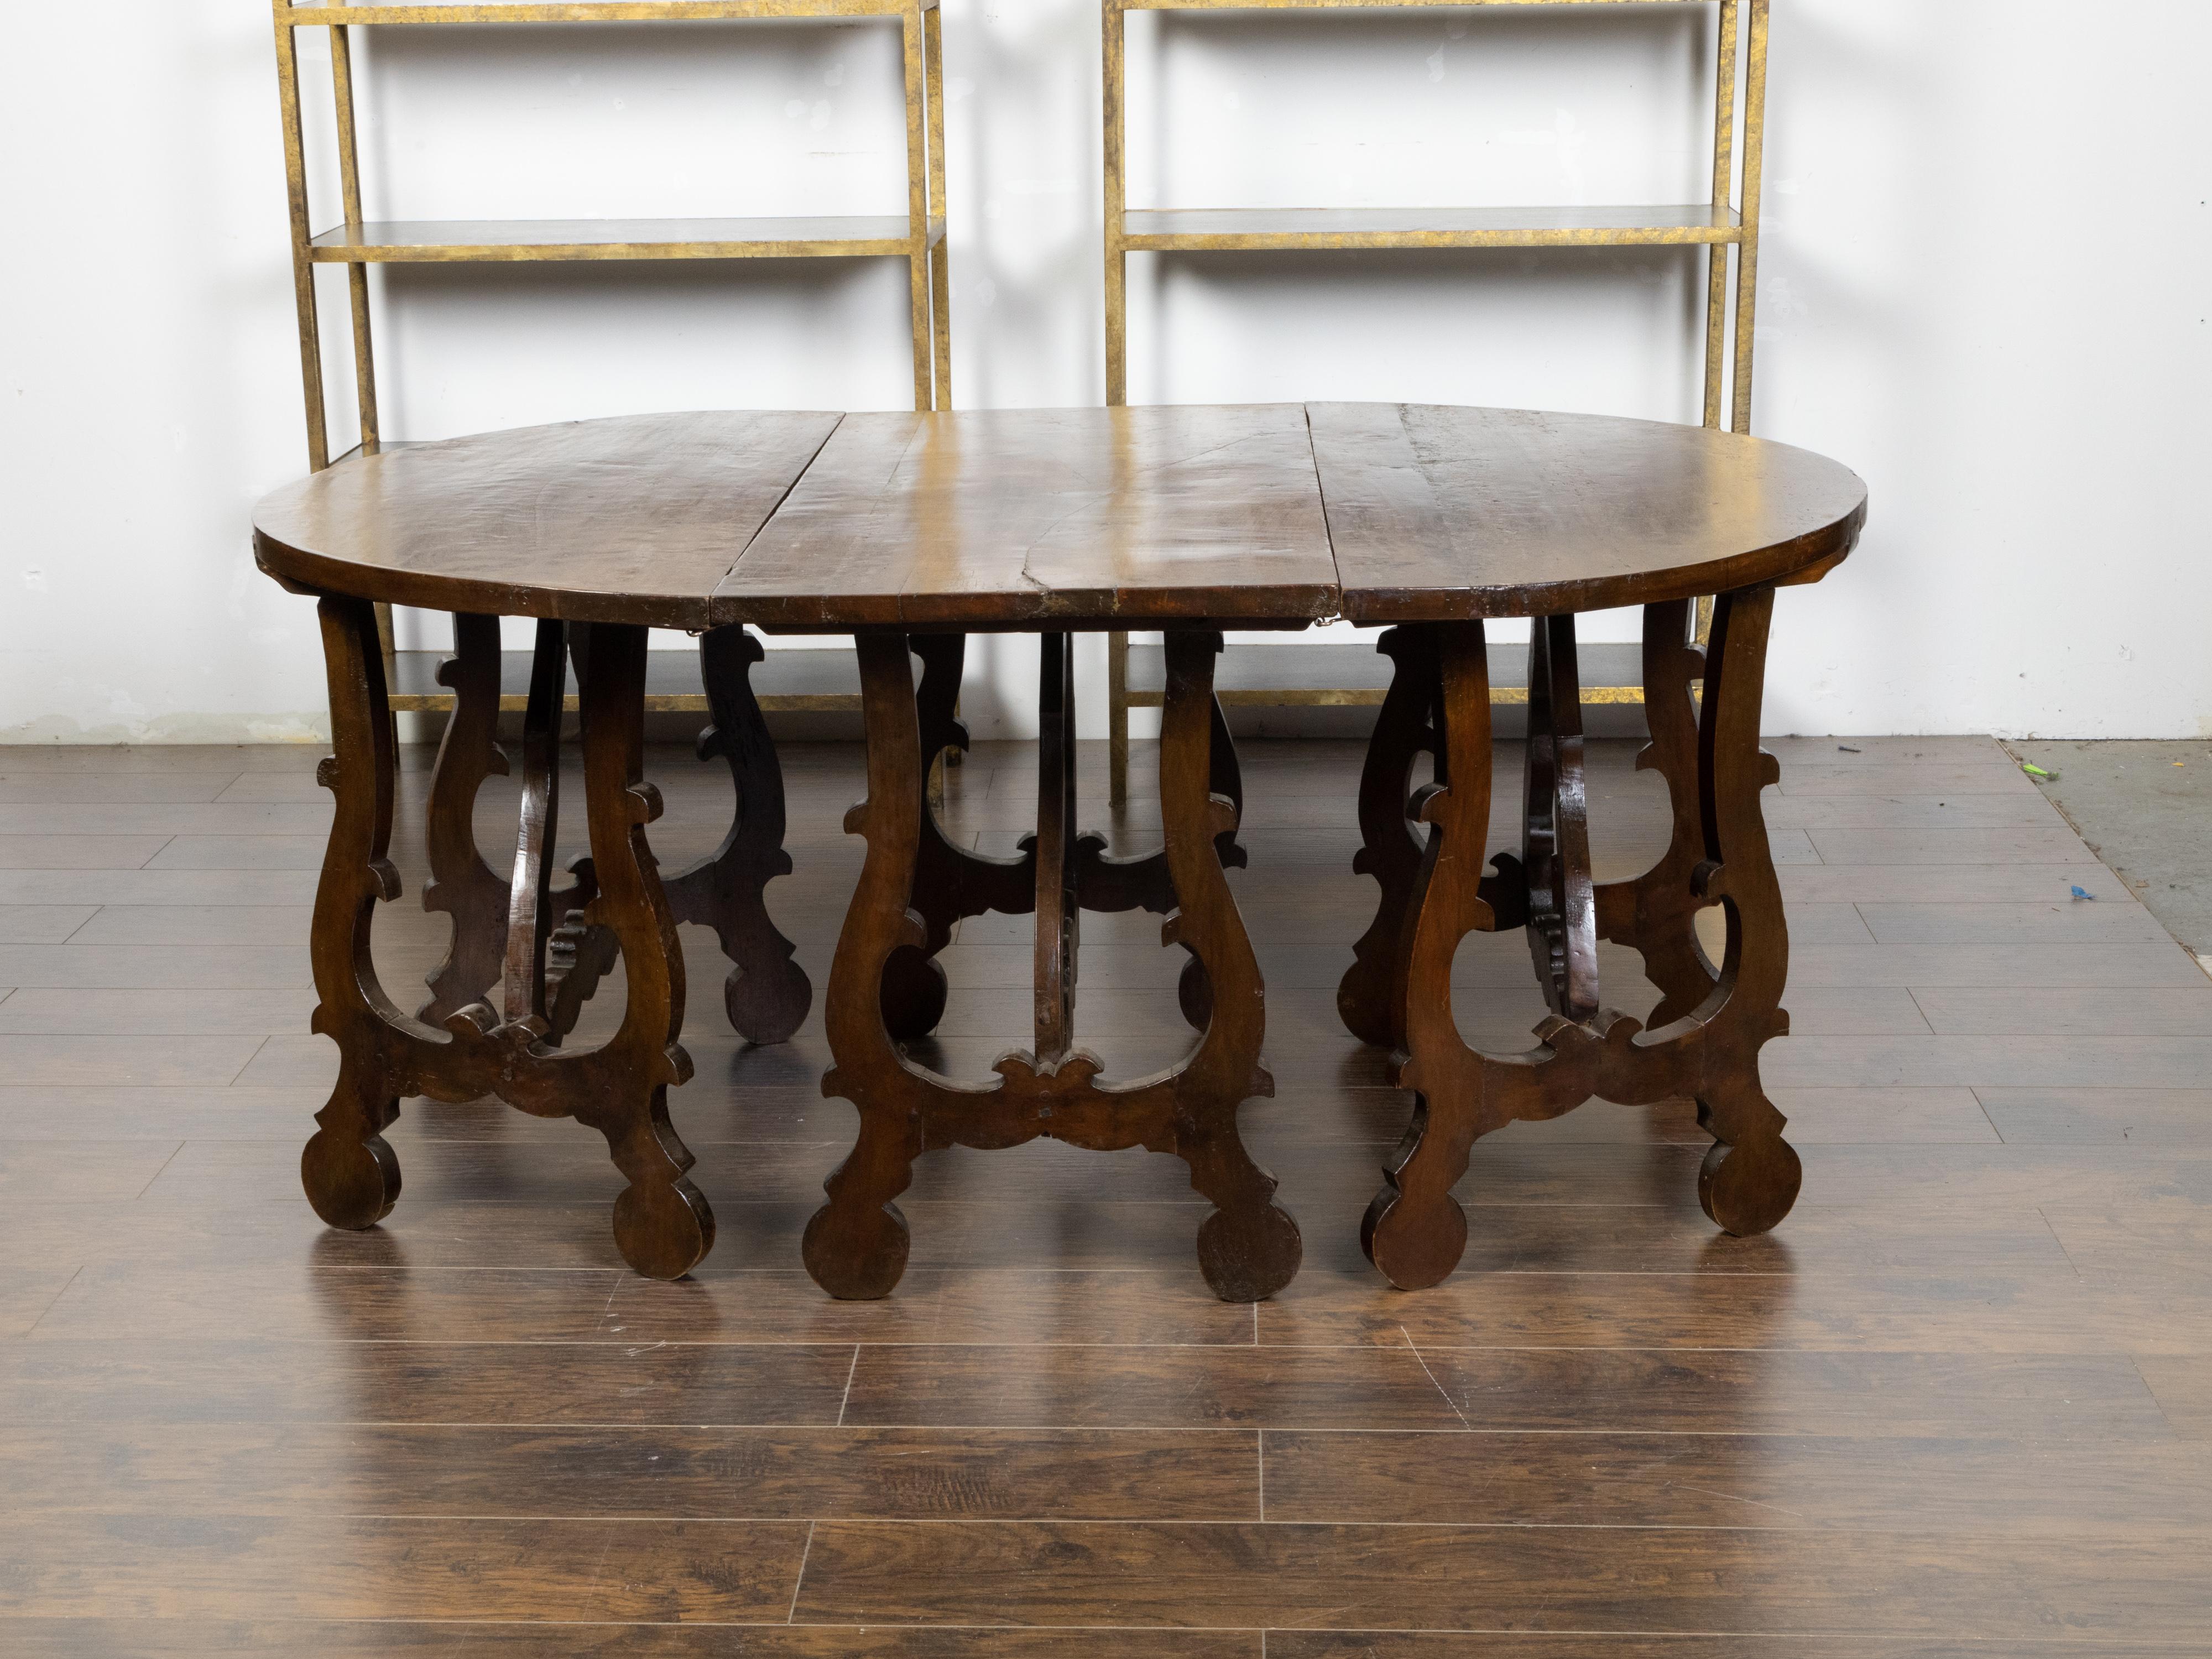 Three-Piece Italian Baroque Style Oval Top Table with Carved Lyre Shaped Legs In Good Condition For Sale In Atlanta, GA